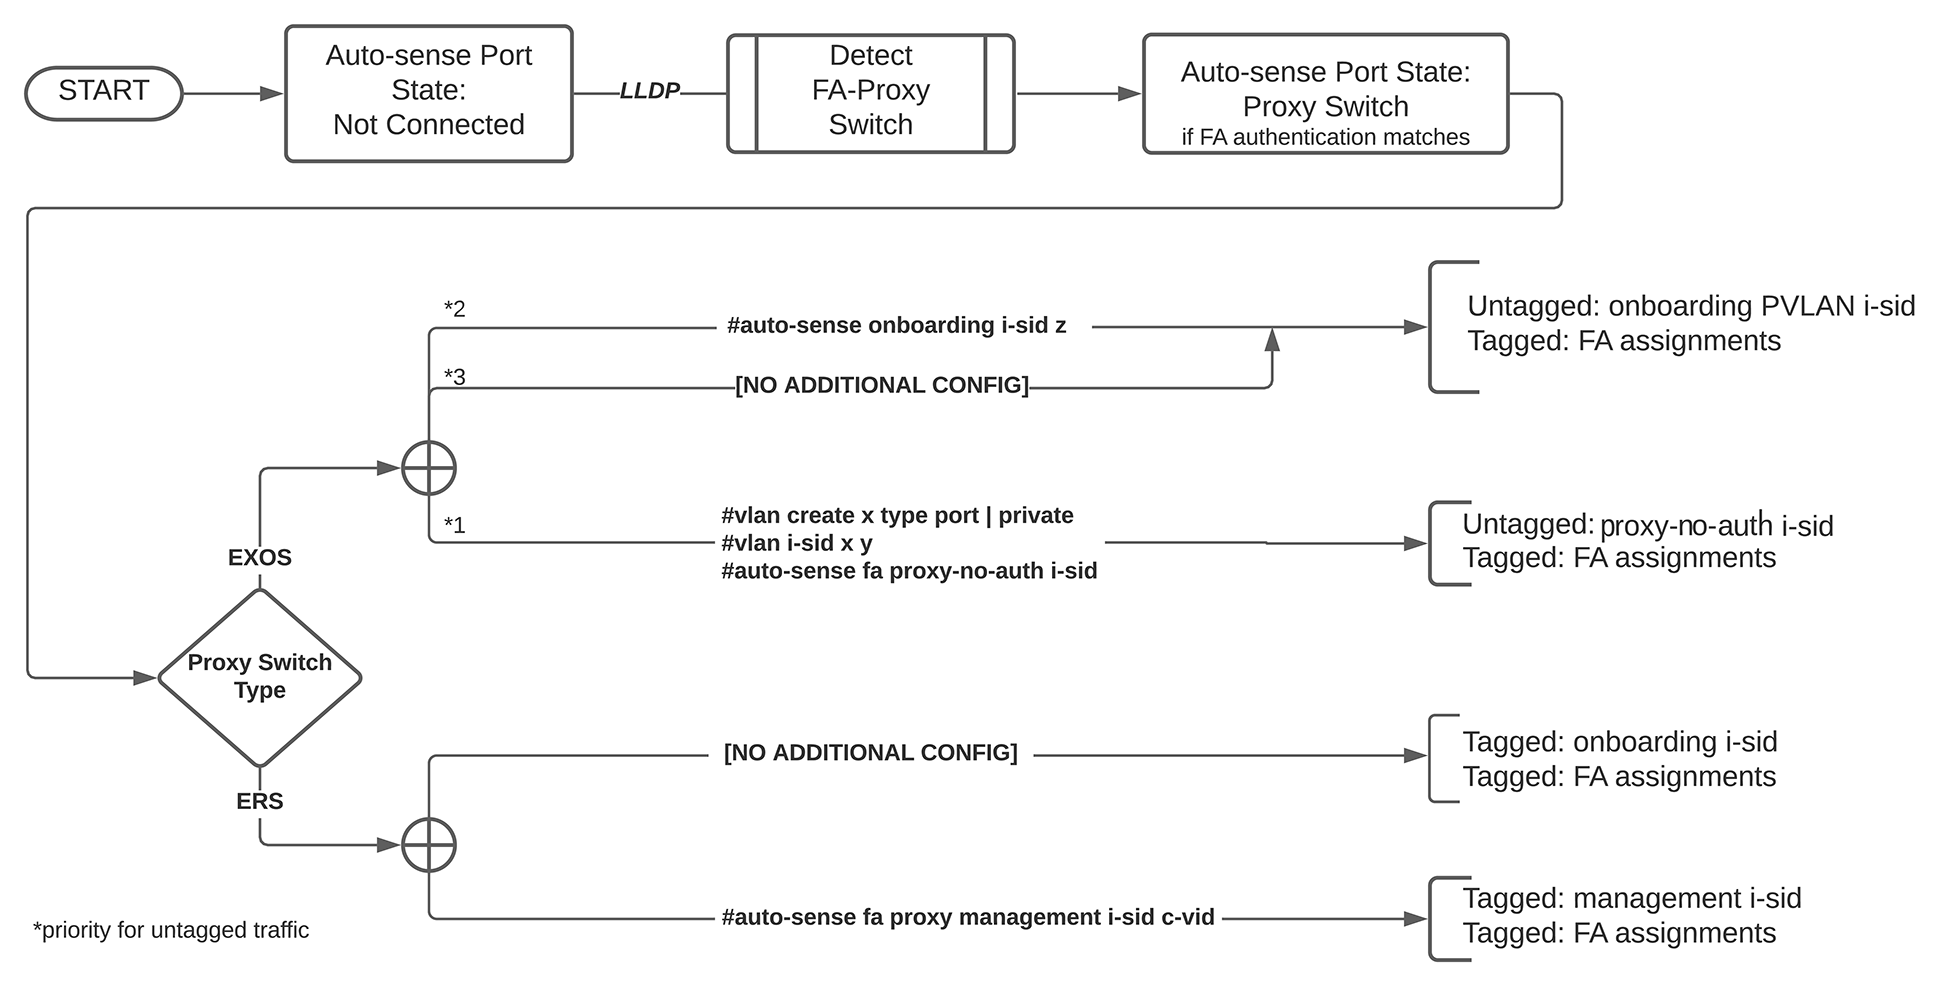 Auto-sense FA proxy switch results in untagged or tagged data based on system configuration